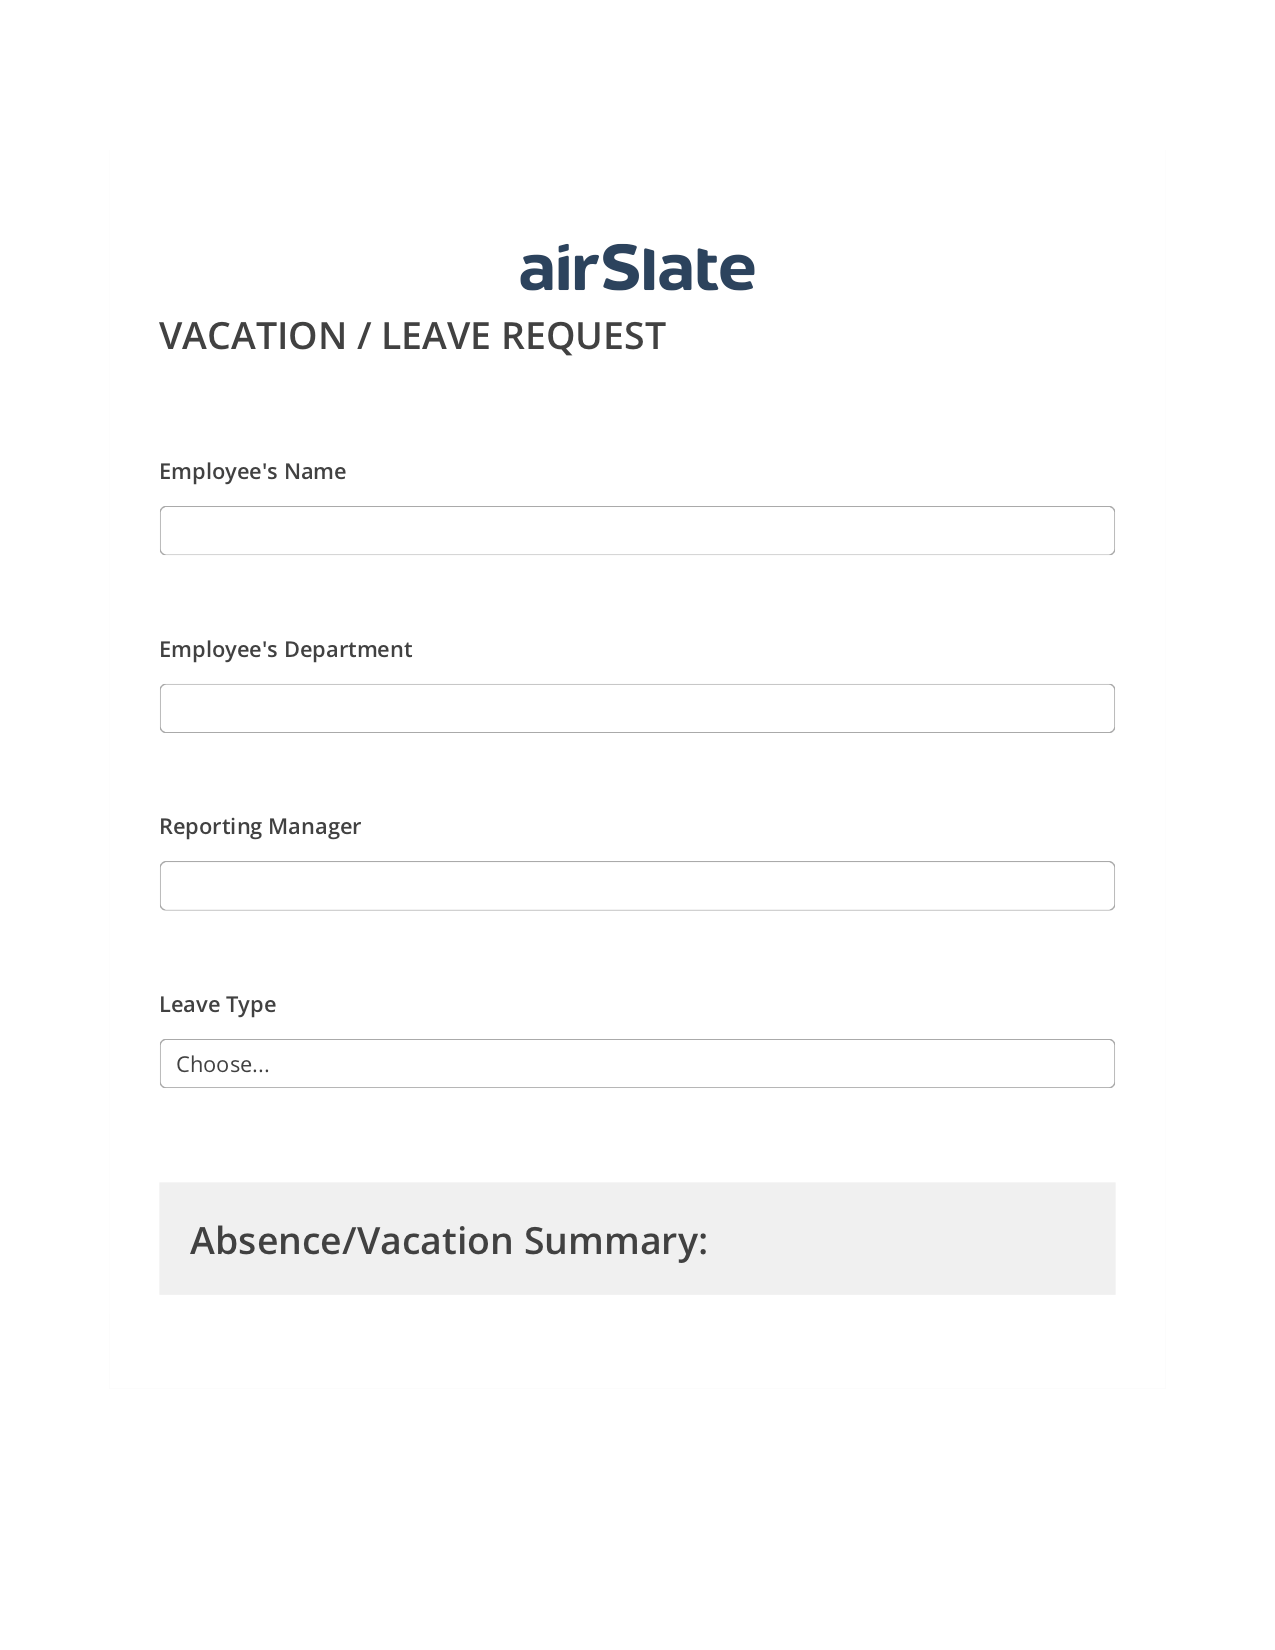 Multirole Vacation/Leave Request Workflow Pre-fill from MS Dynamics 365 Records, Remove Slate Bot, Export to Smartsheet